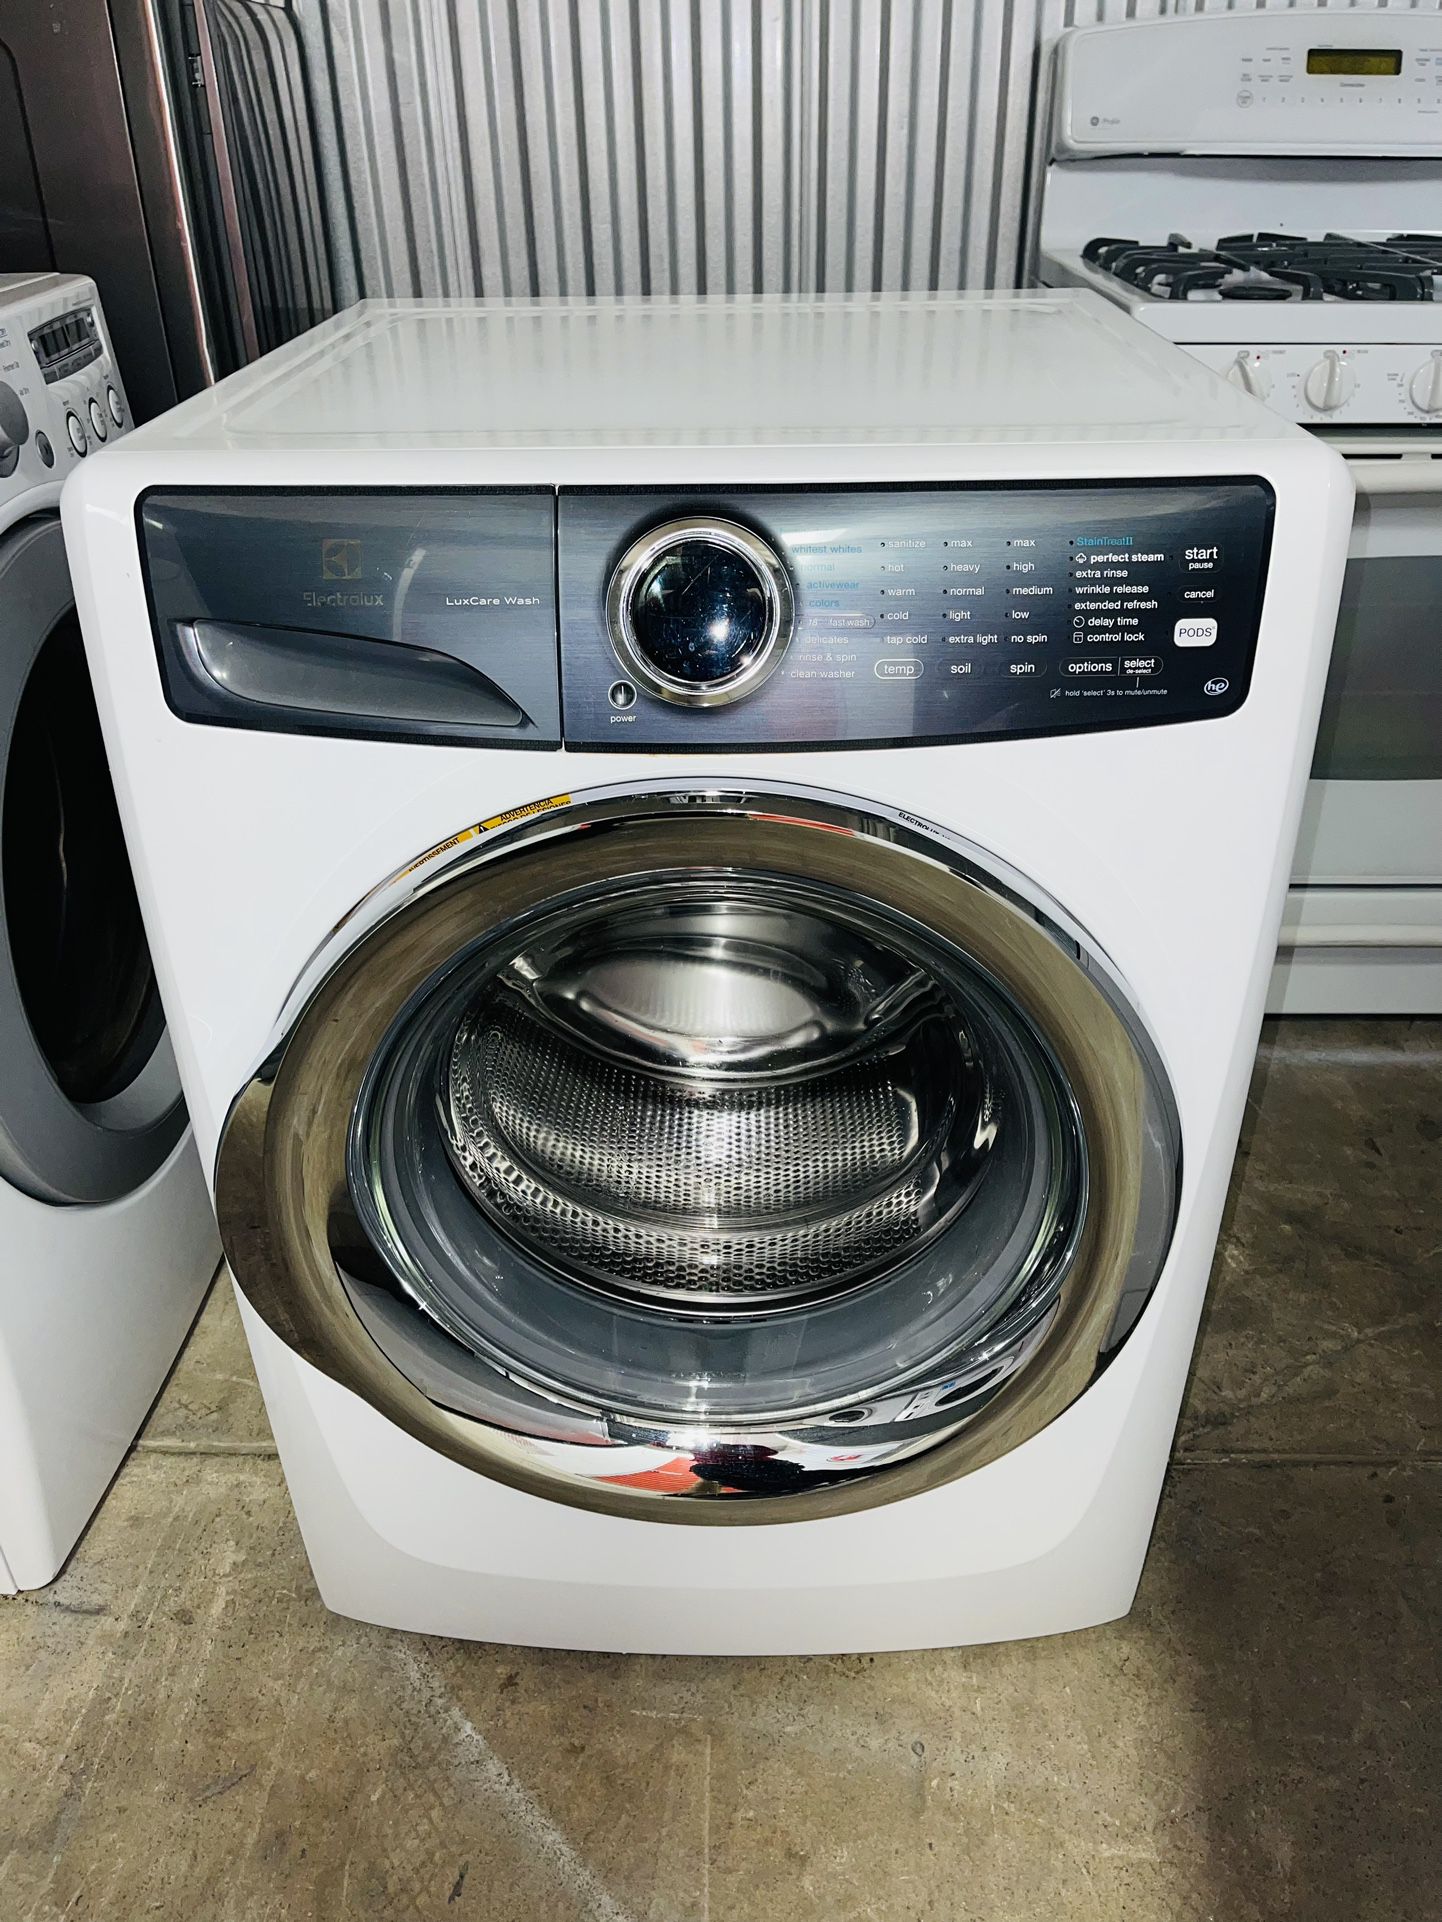 Electrolux washing machine in very perfect condition, a receipt for 60 days warranty